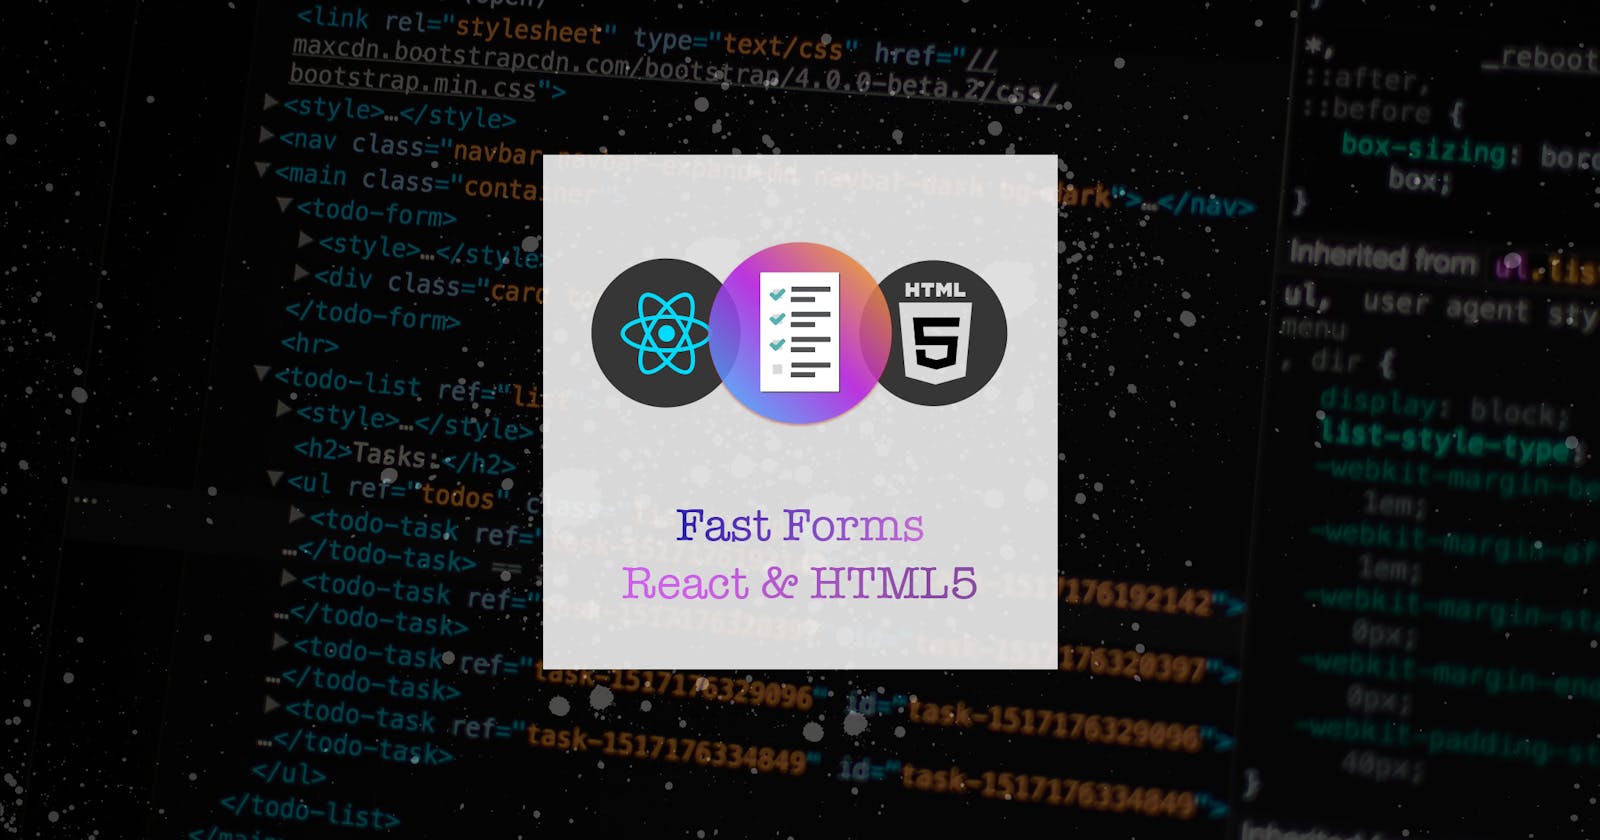 Building Fast Forms in React with HTML5 & Validations